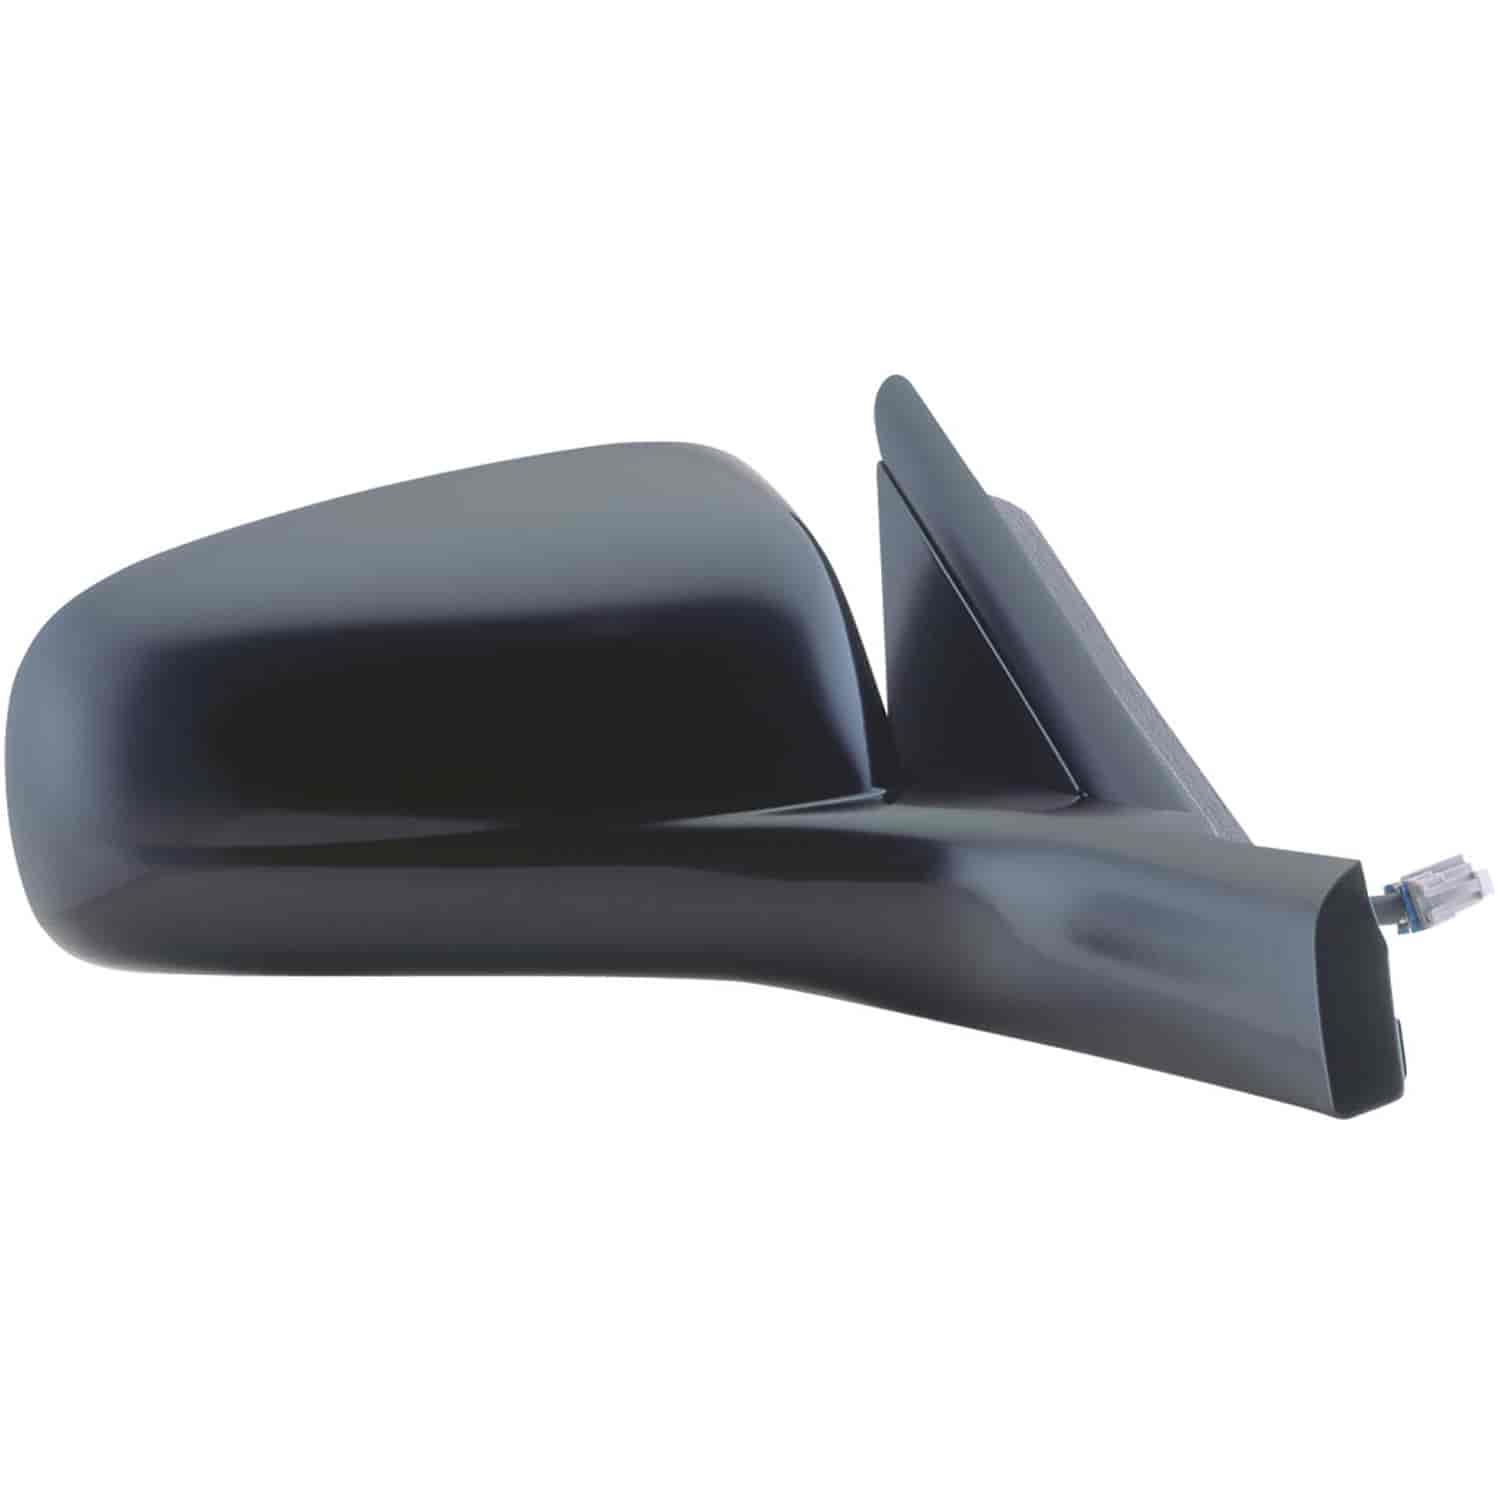 OEM Style Replacement mirror for 00-05 Chevrolet Impala passenger side mirror tested to fit and func